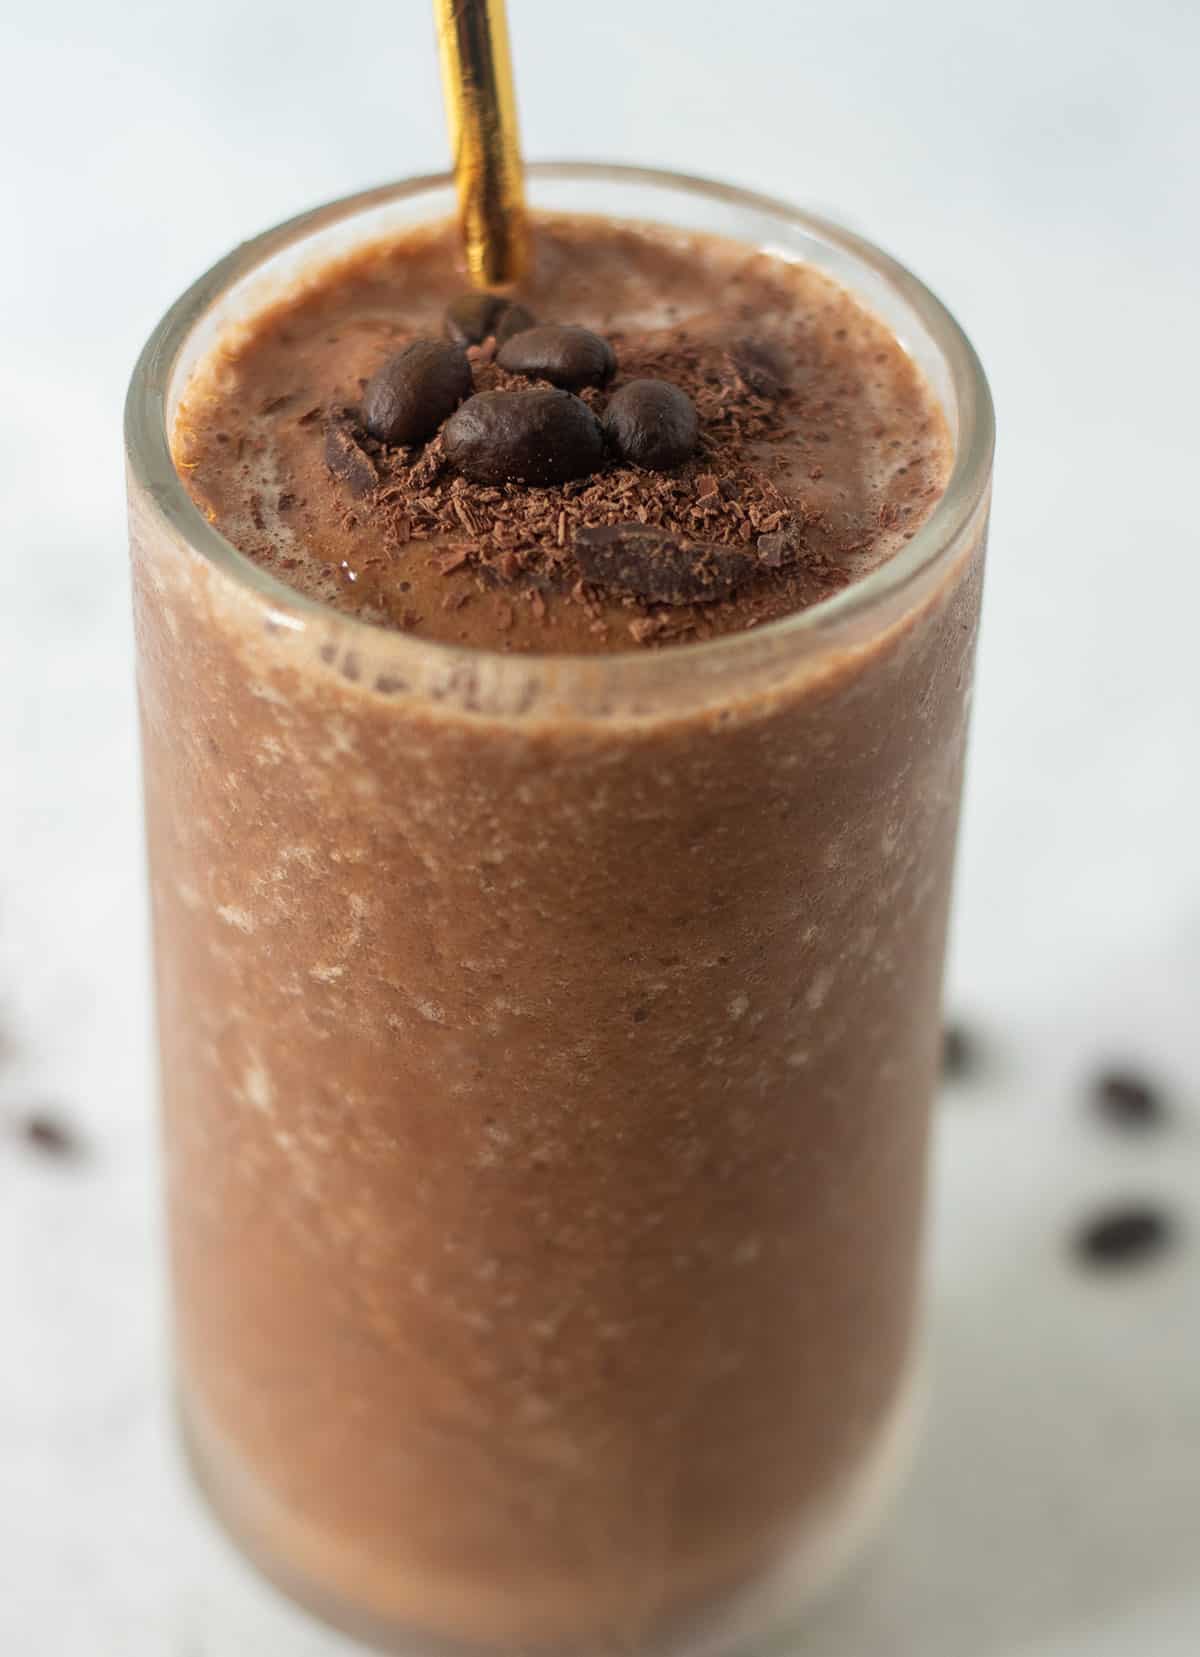 coffee smoothie recipe served in a clear glass with a gold straw. It's topped with dark shaved chocolate and fresh coffee beans. A gold straw in the glass for drinking.